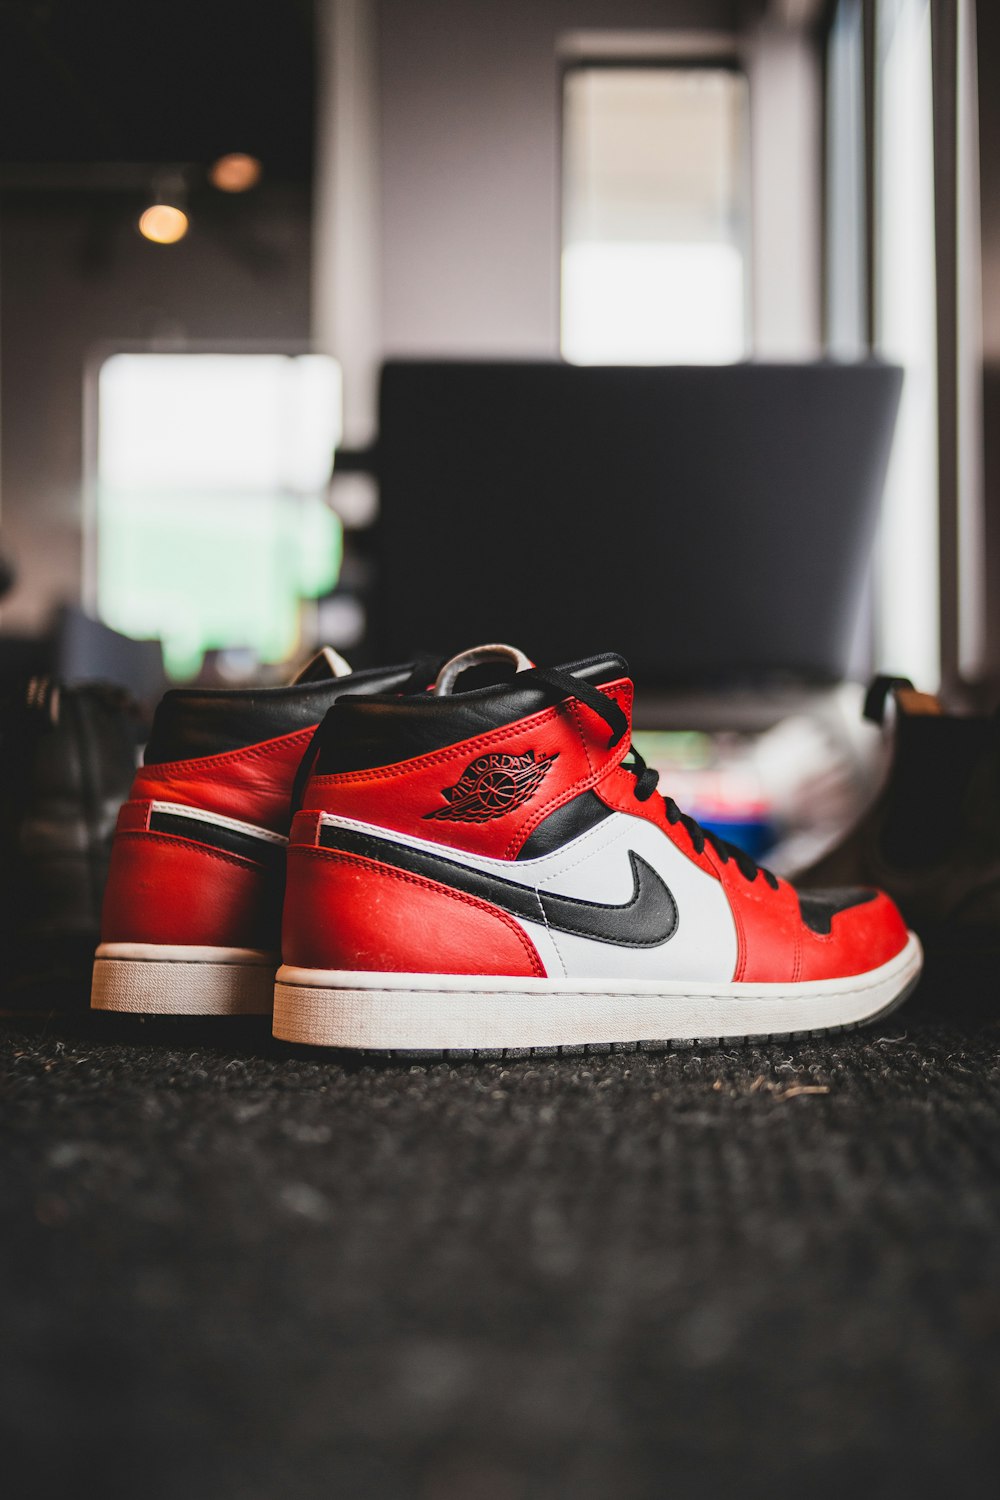 black white and red nike athletic shoes photo – Free Apparel Image on  Unsplash